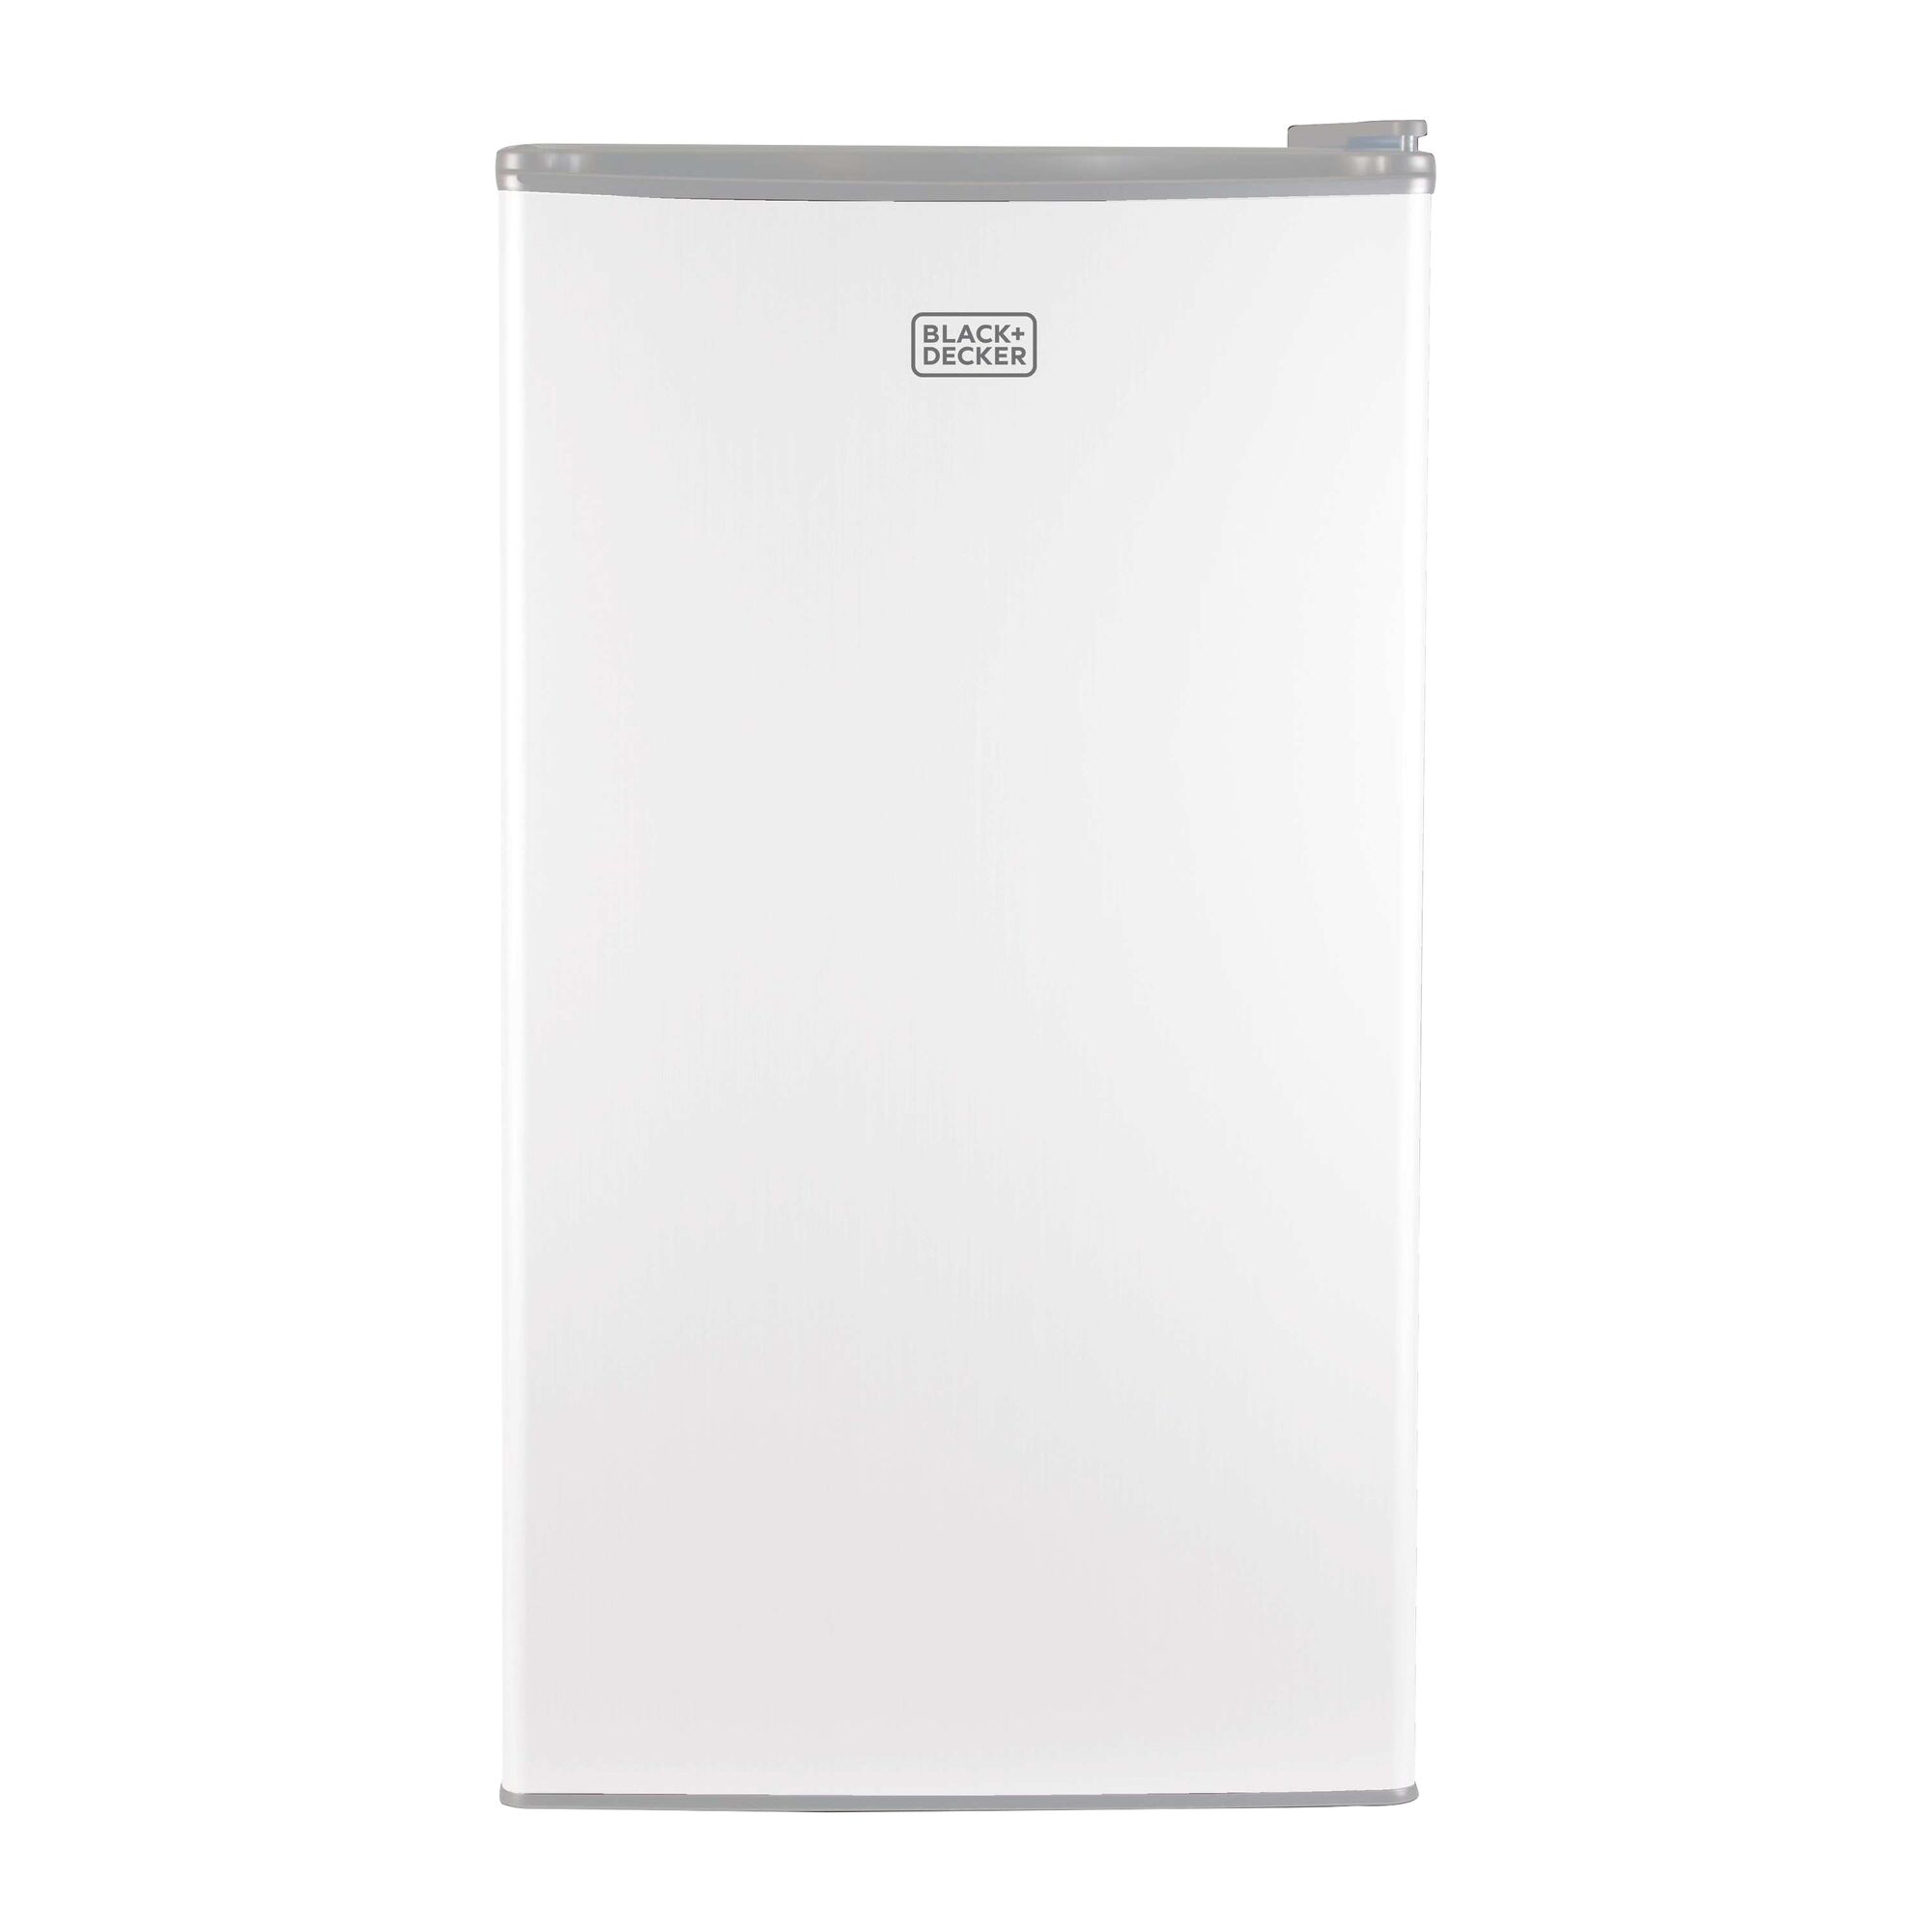 3.2 Cubic foot Energy Star Refrigerator with Freezer white.